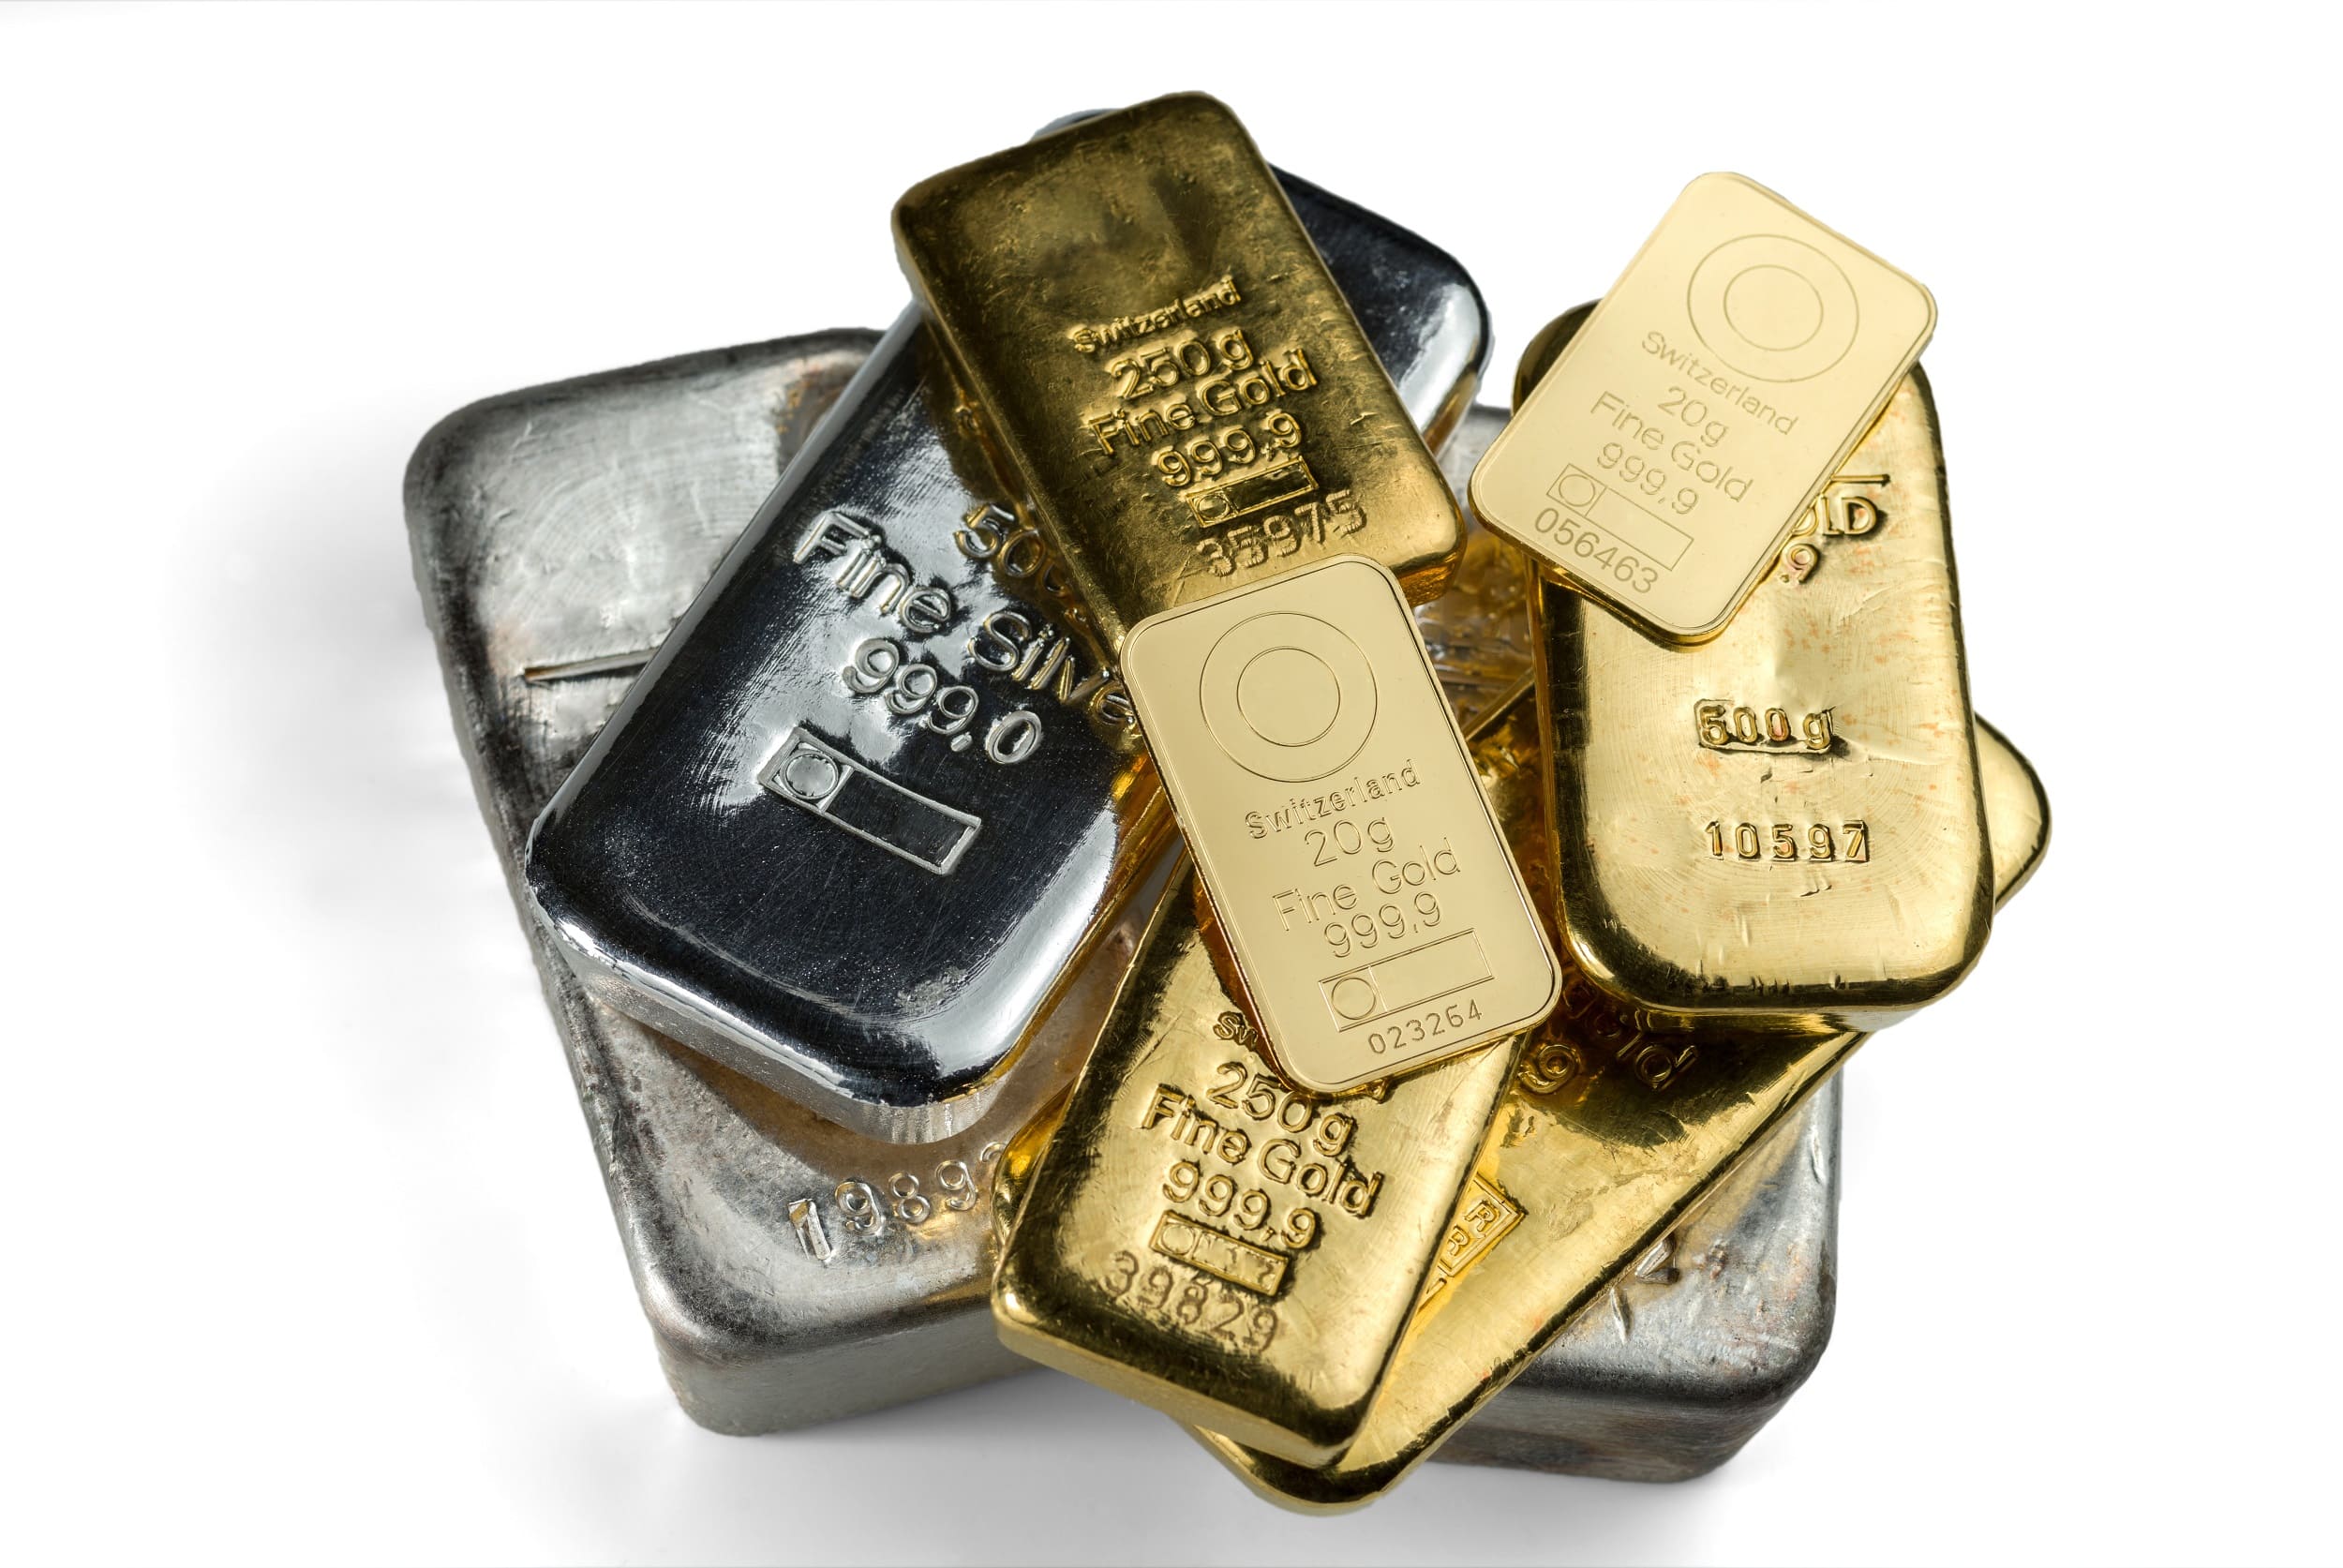 Various gold and silver bars against a white background